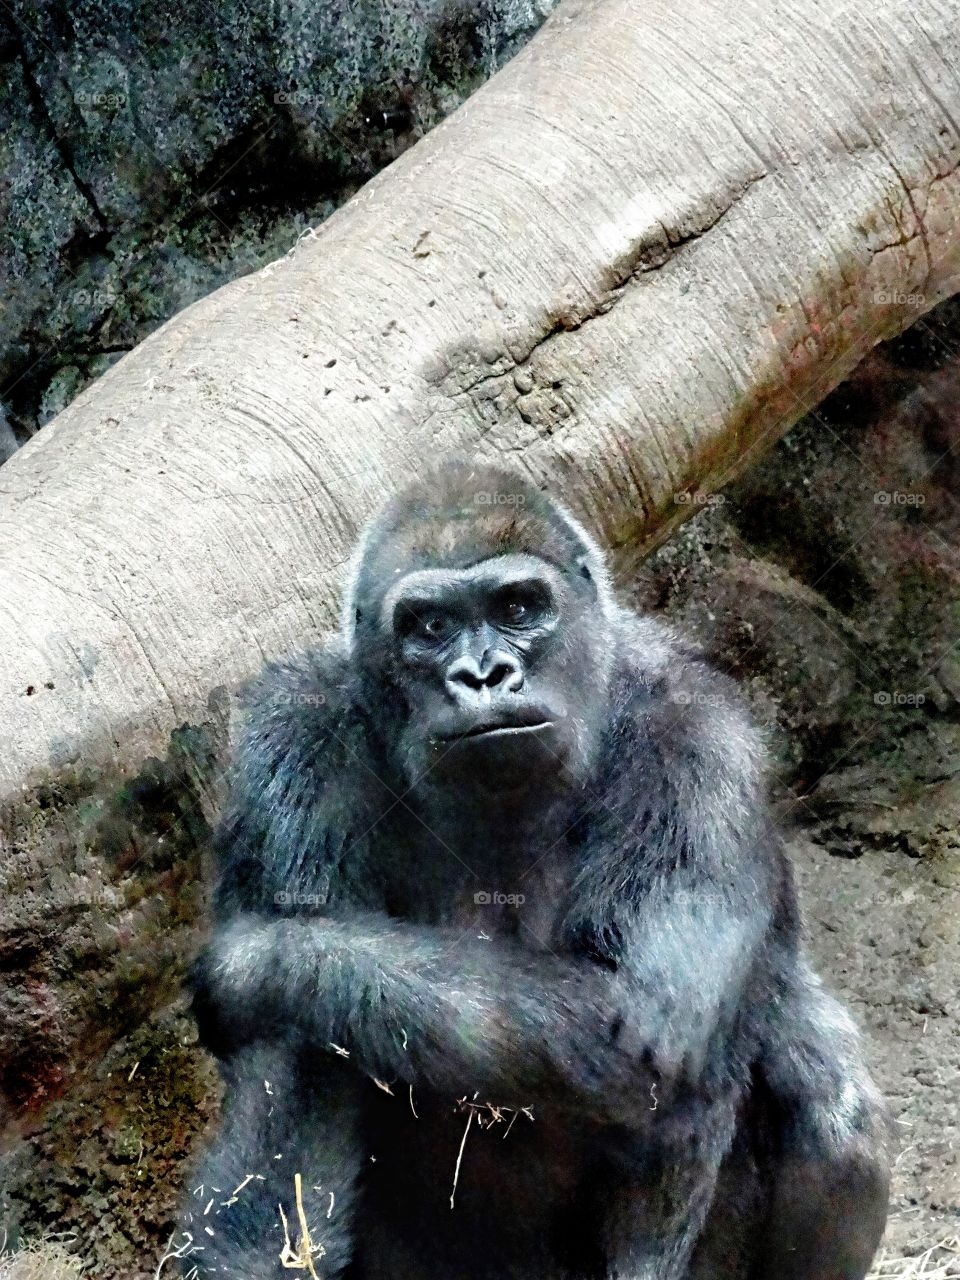 head gorilla in charge. the man of the gorilla family, sure does look intimidating! 